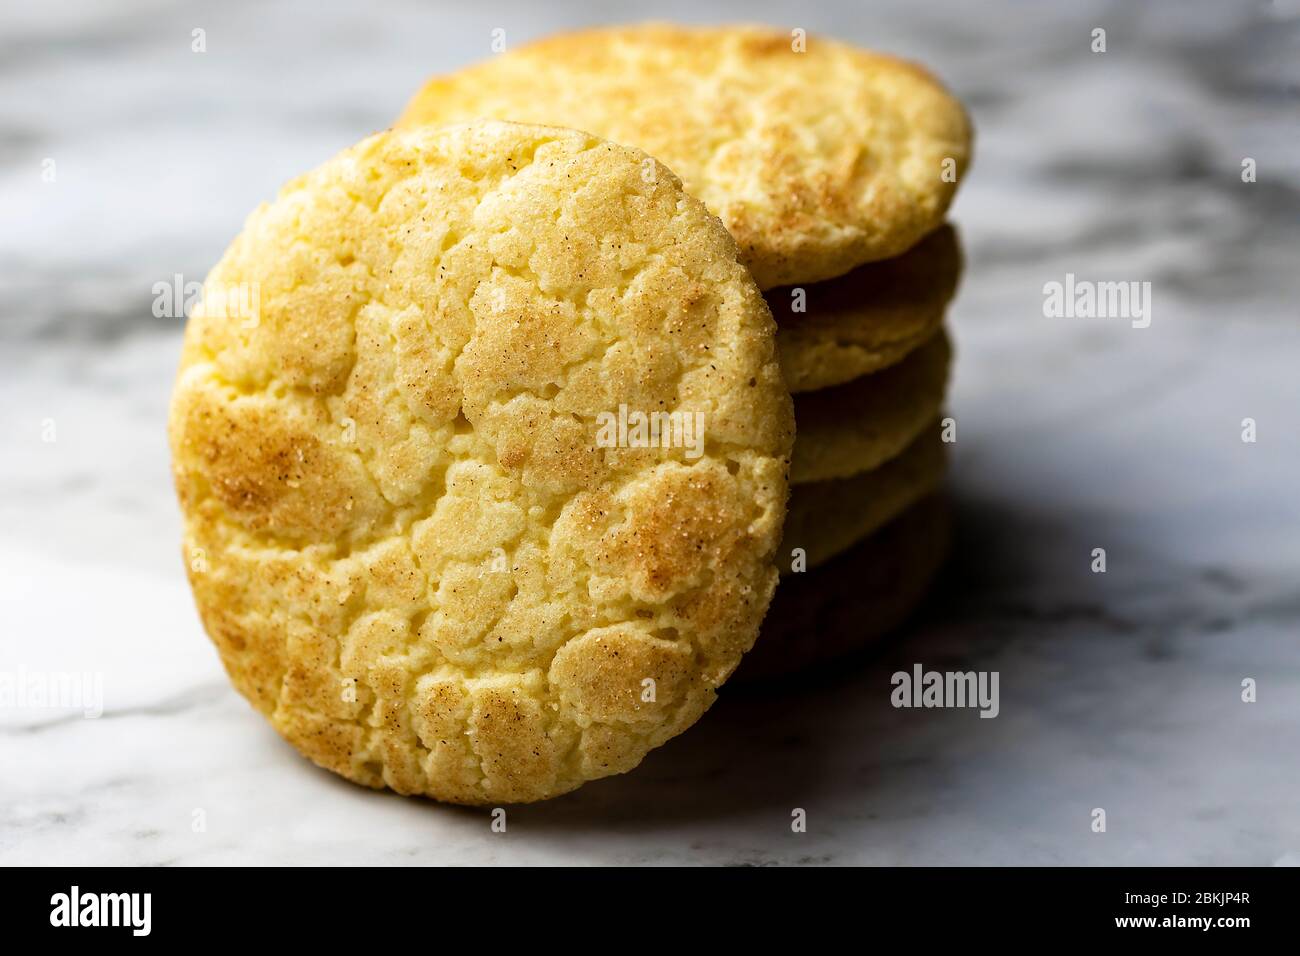 A stack of snickerdoodle cookies on a white and  grey marble surface.  Blurry background.  Close up view of cookie facing camera. Stock Photo